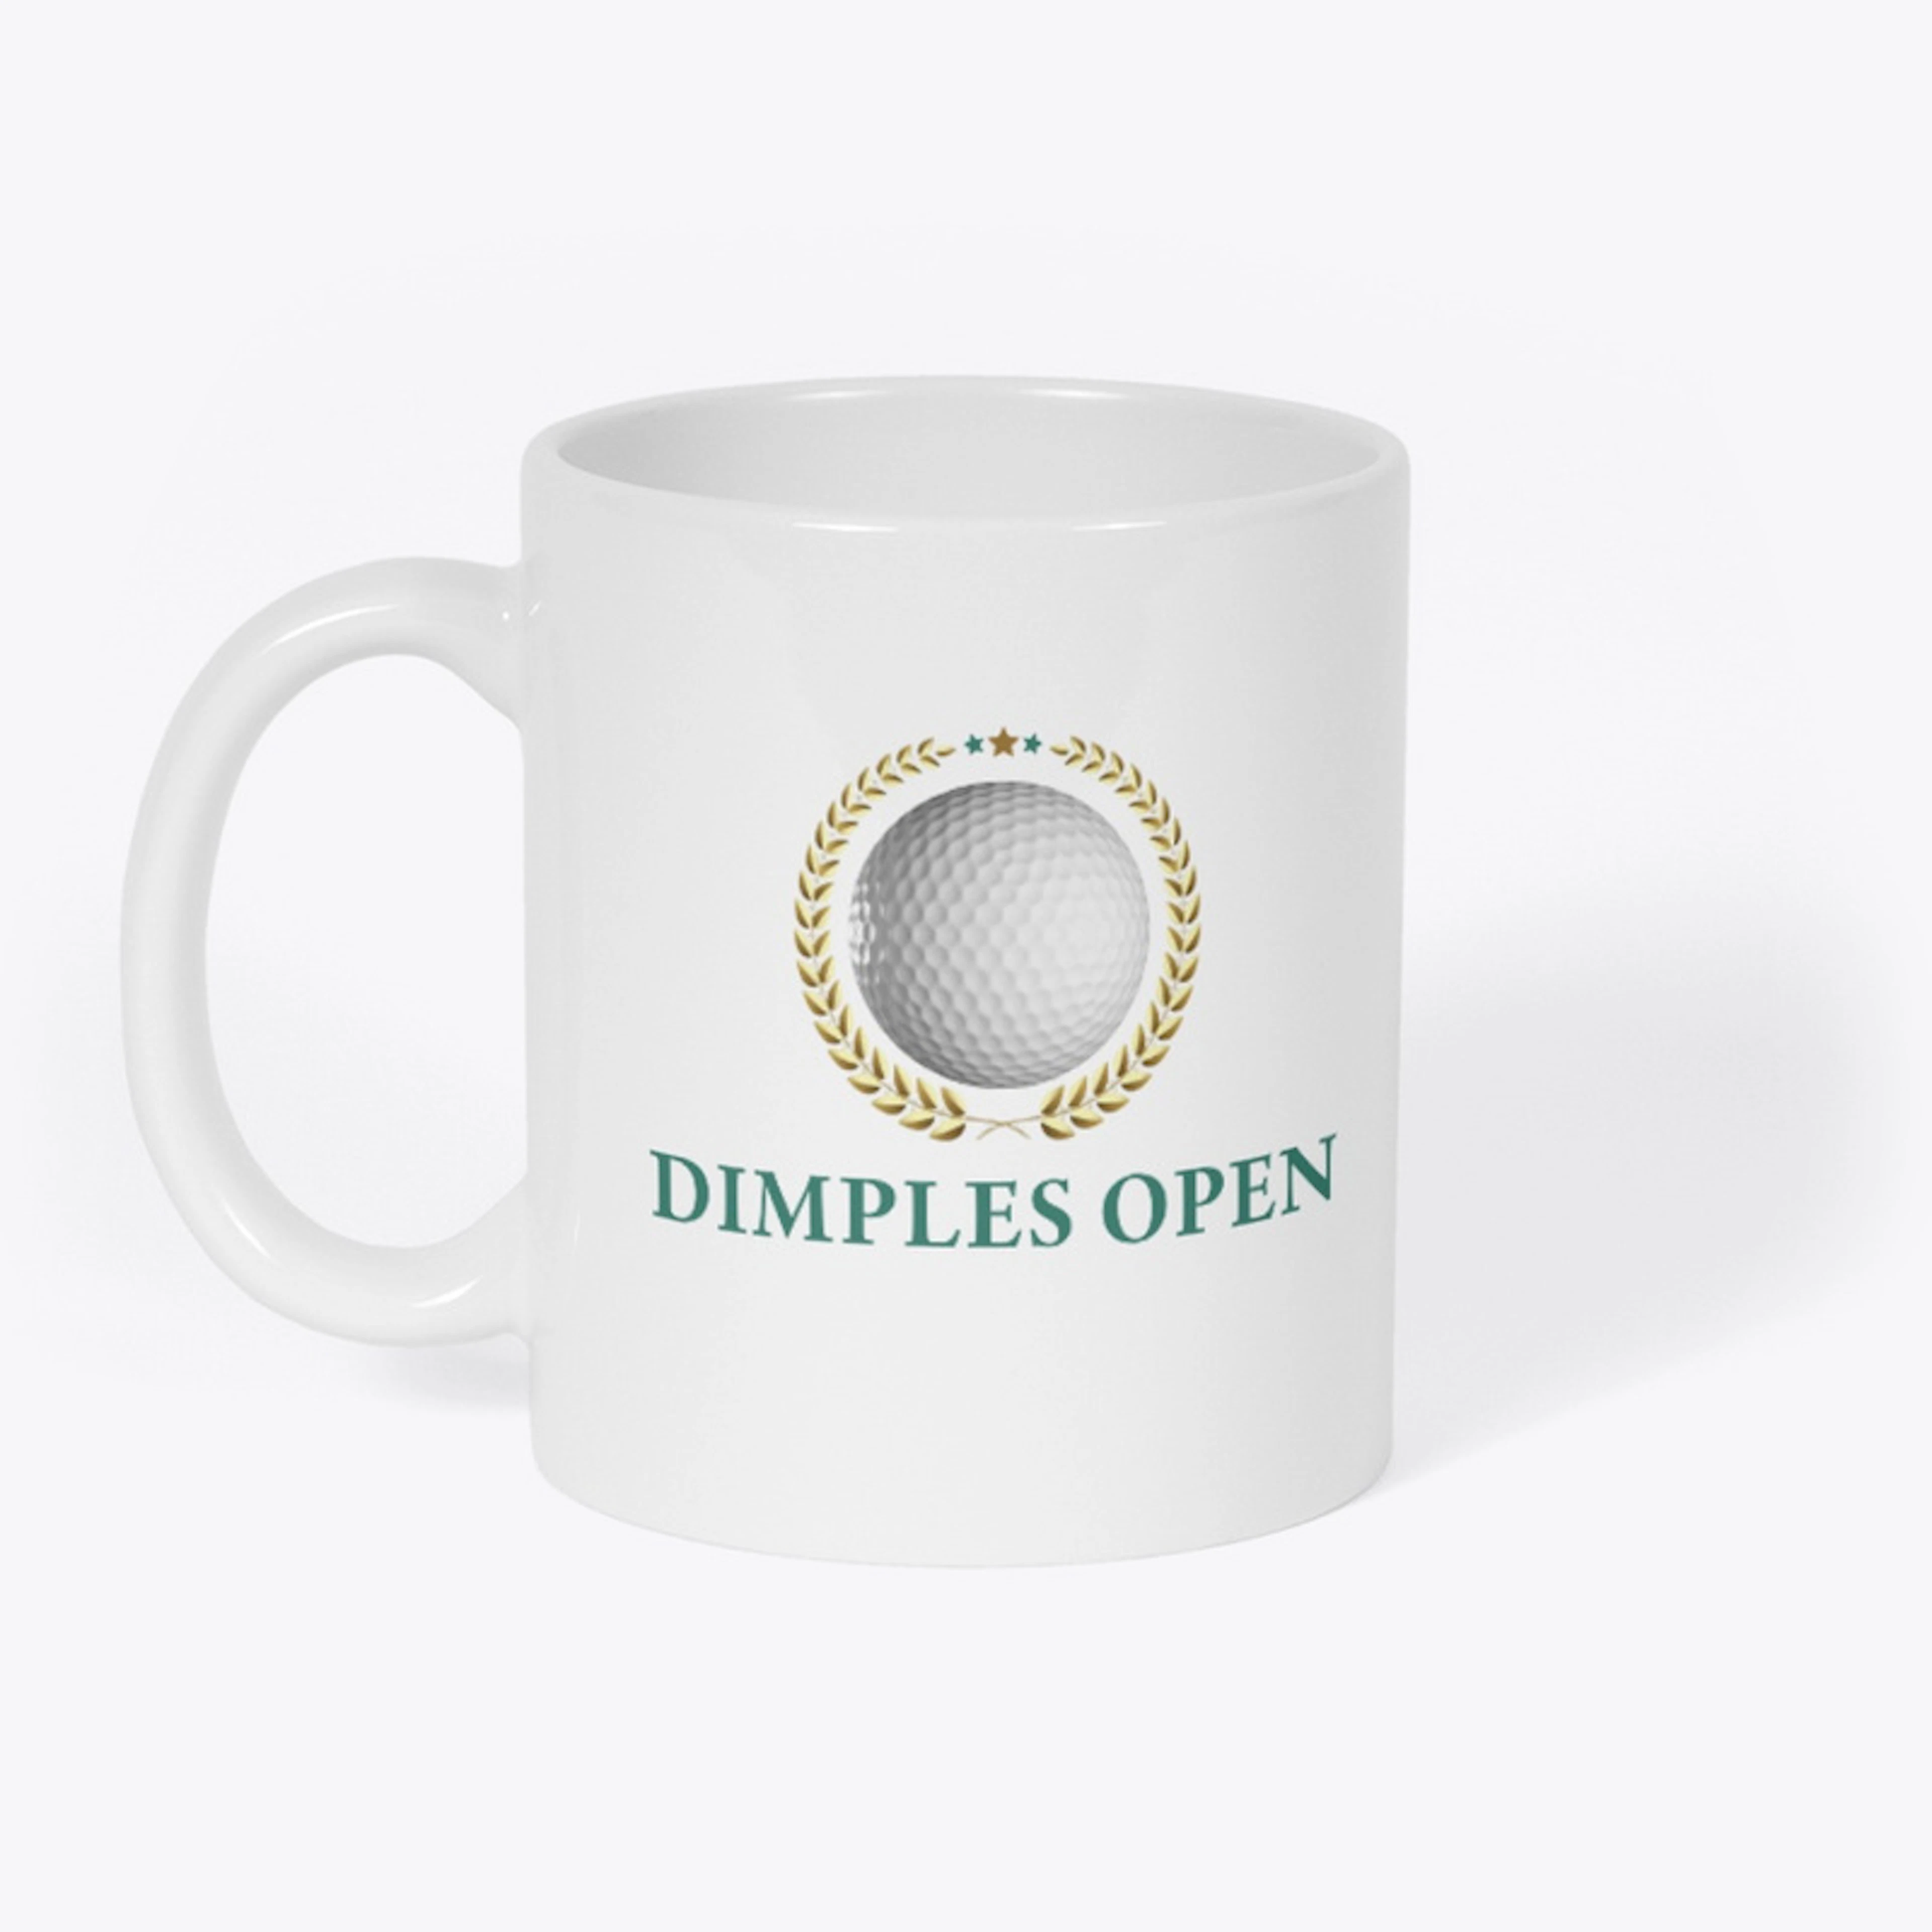 Dimples Open Golf Apparel